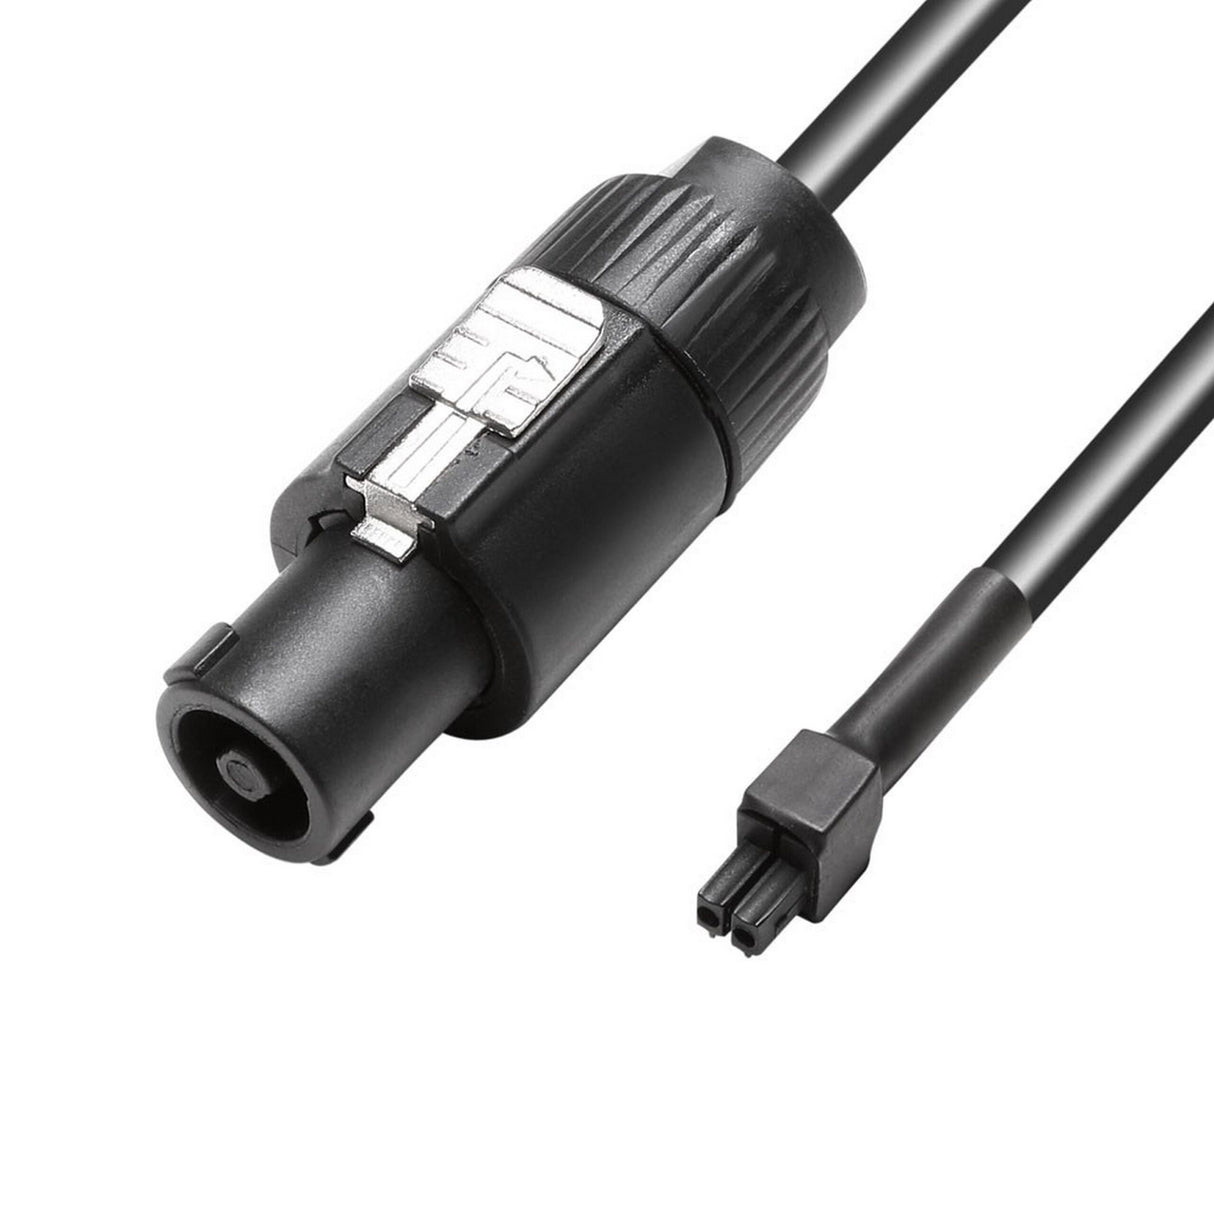 LD Systems CURV 500 CABLE 2 Speaker Cable with Standard Speaker Plugs Terminal Block, 3 Meters